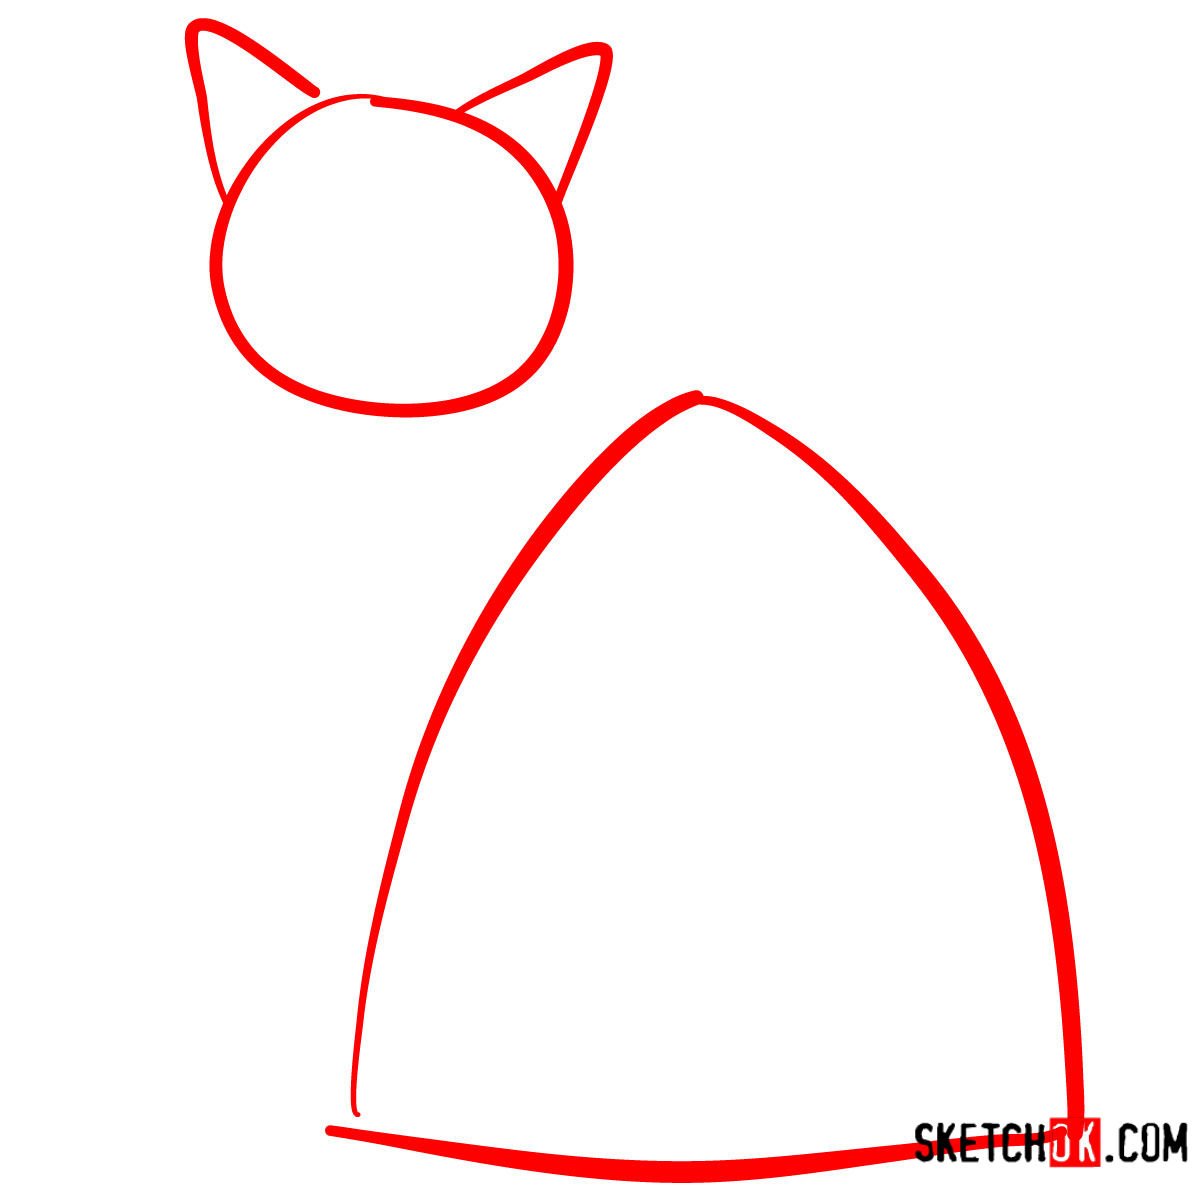 How to draw the American Shorthair cat - step 01